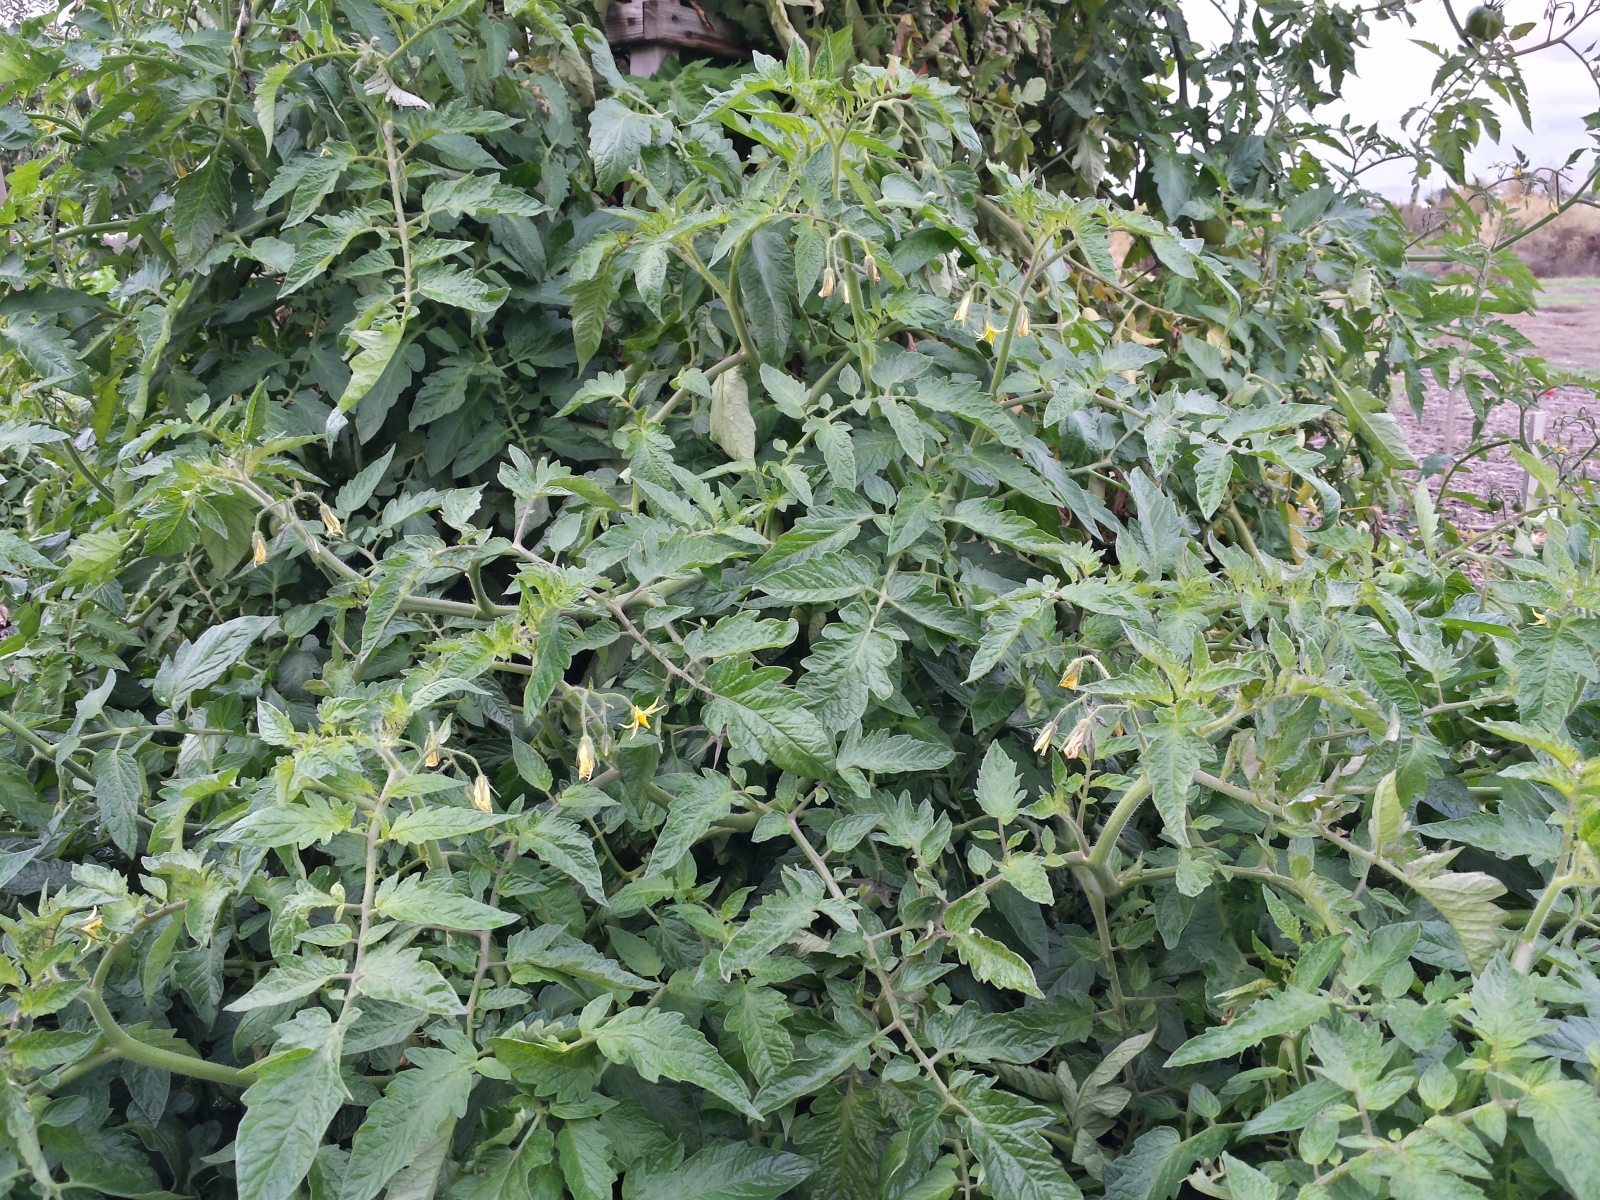 (2/2) After even more killing frosts the plant is still blooming as of November 1st! This plant produced over 600 tomatoes from June 1st to November 1st.